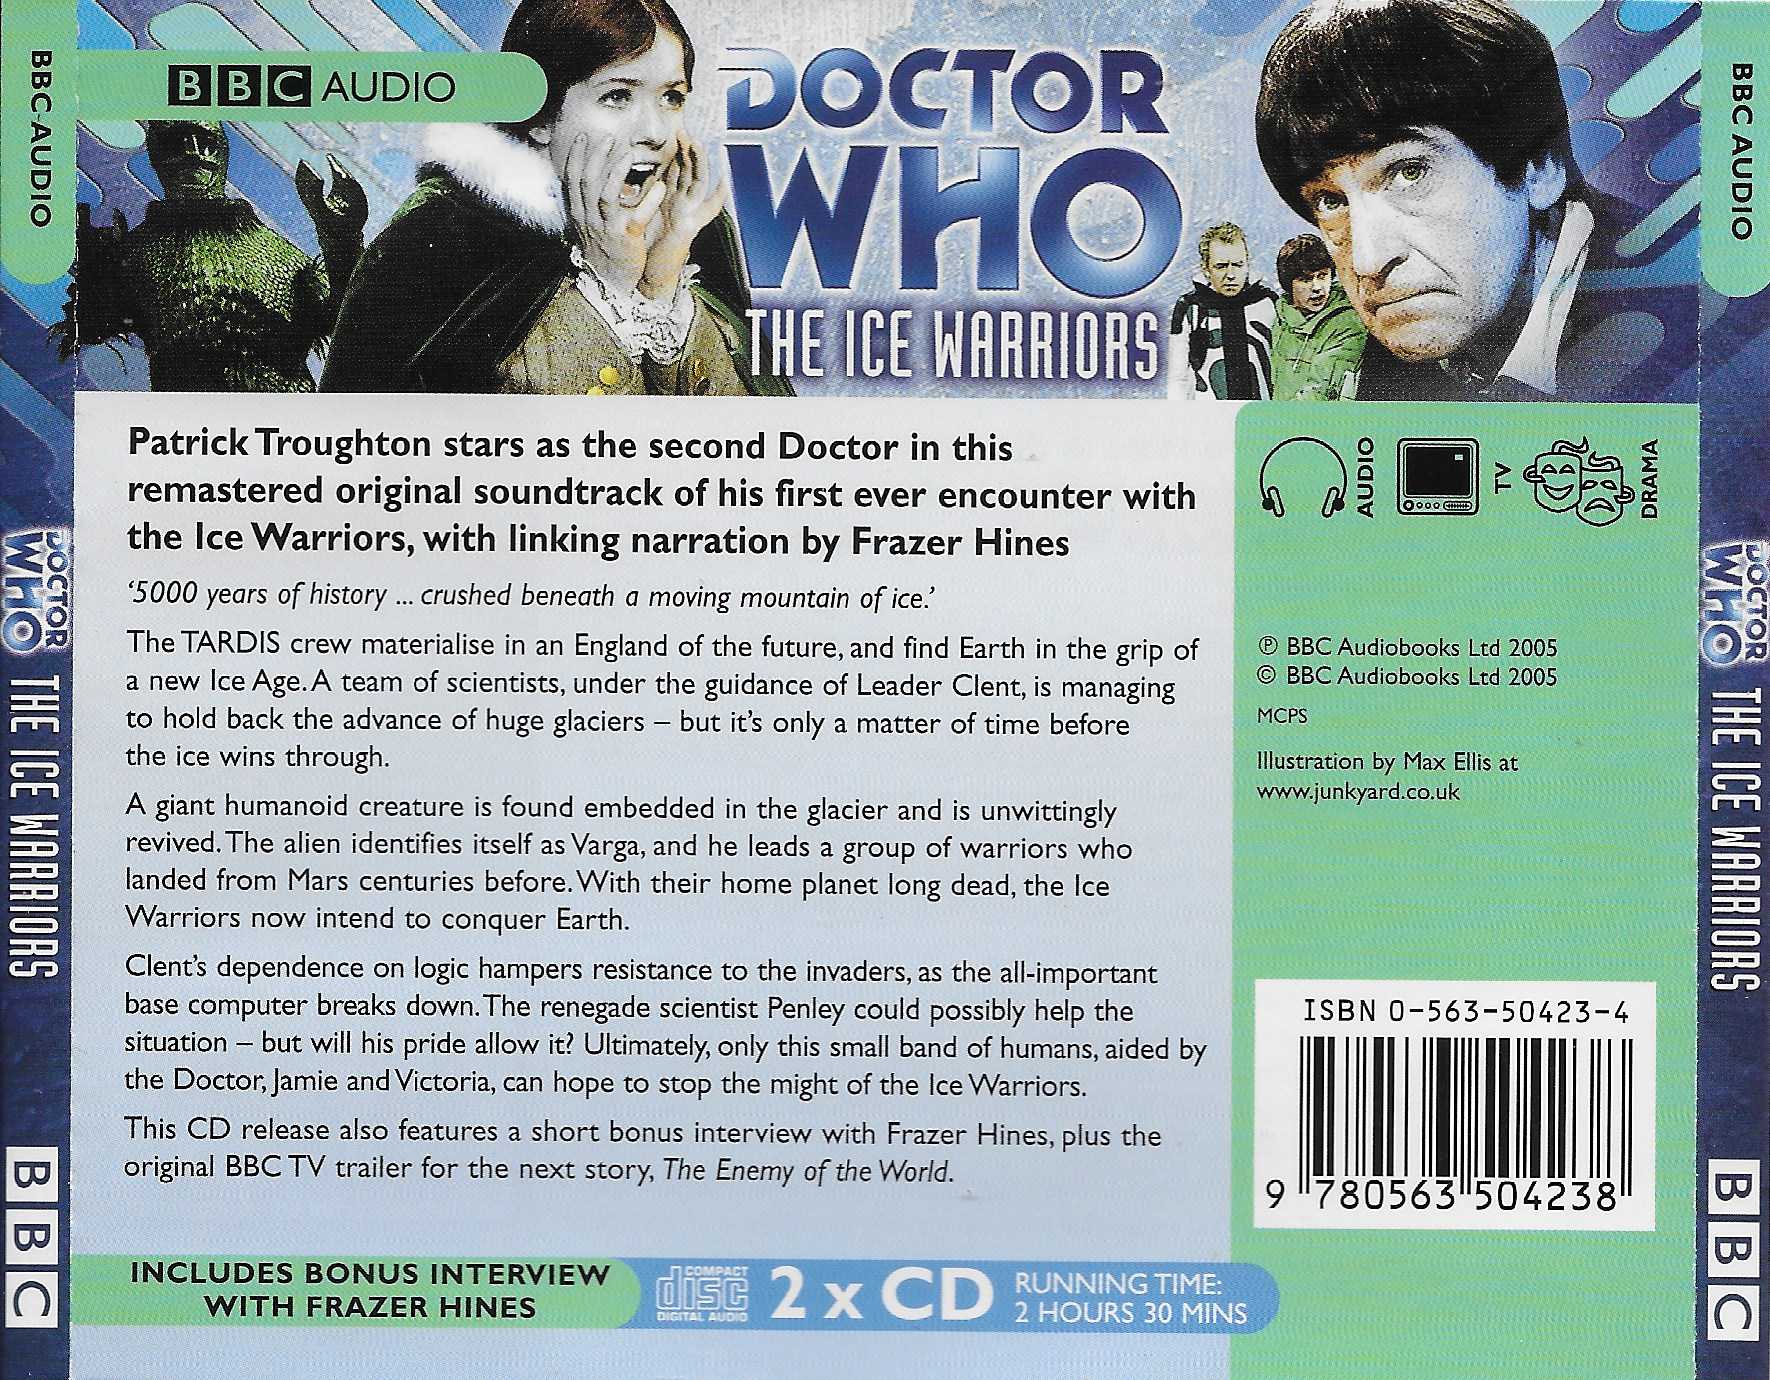 Picture of ISBN 0-563-50423-4 Doctor Who - The Ice Warriors by artist Brian Hayles from the BBC records and Tapes library